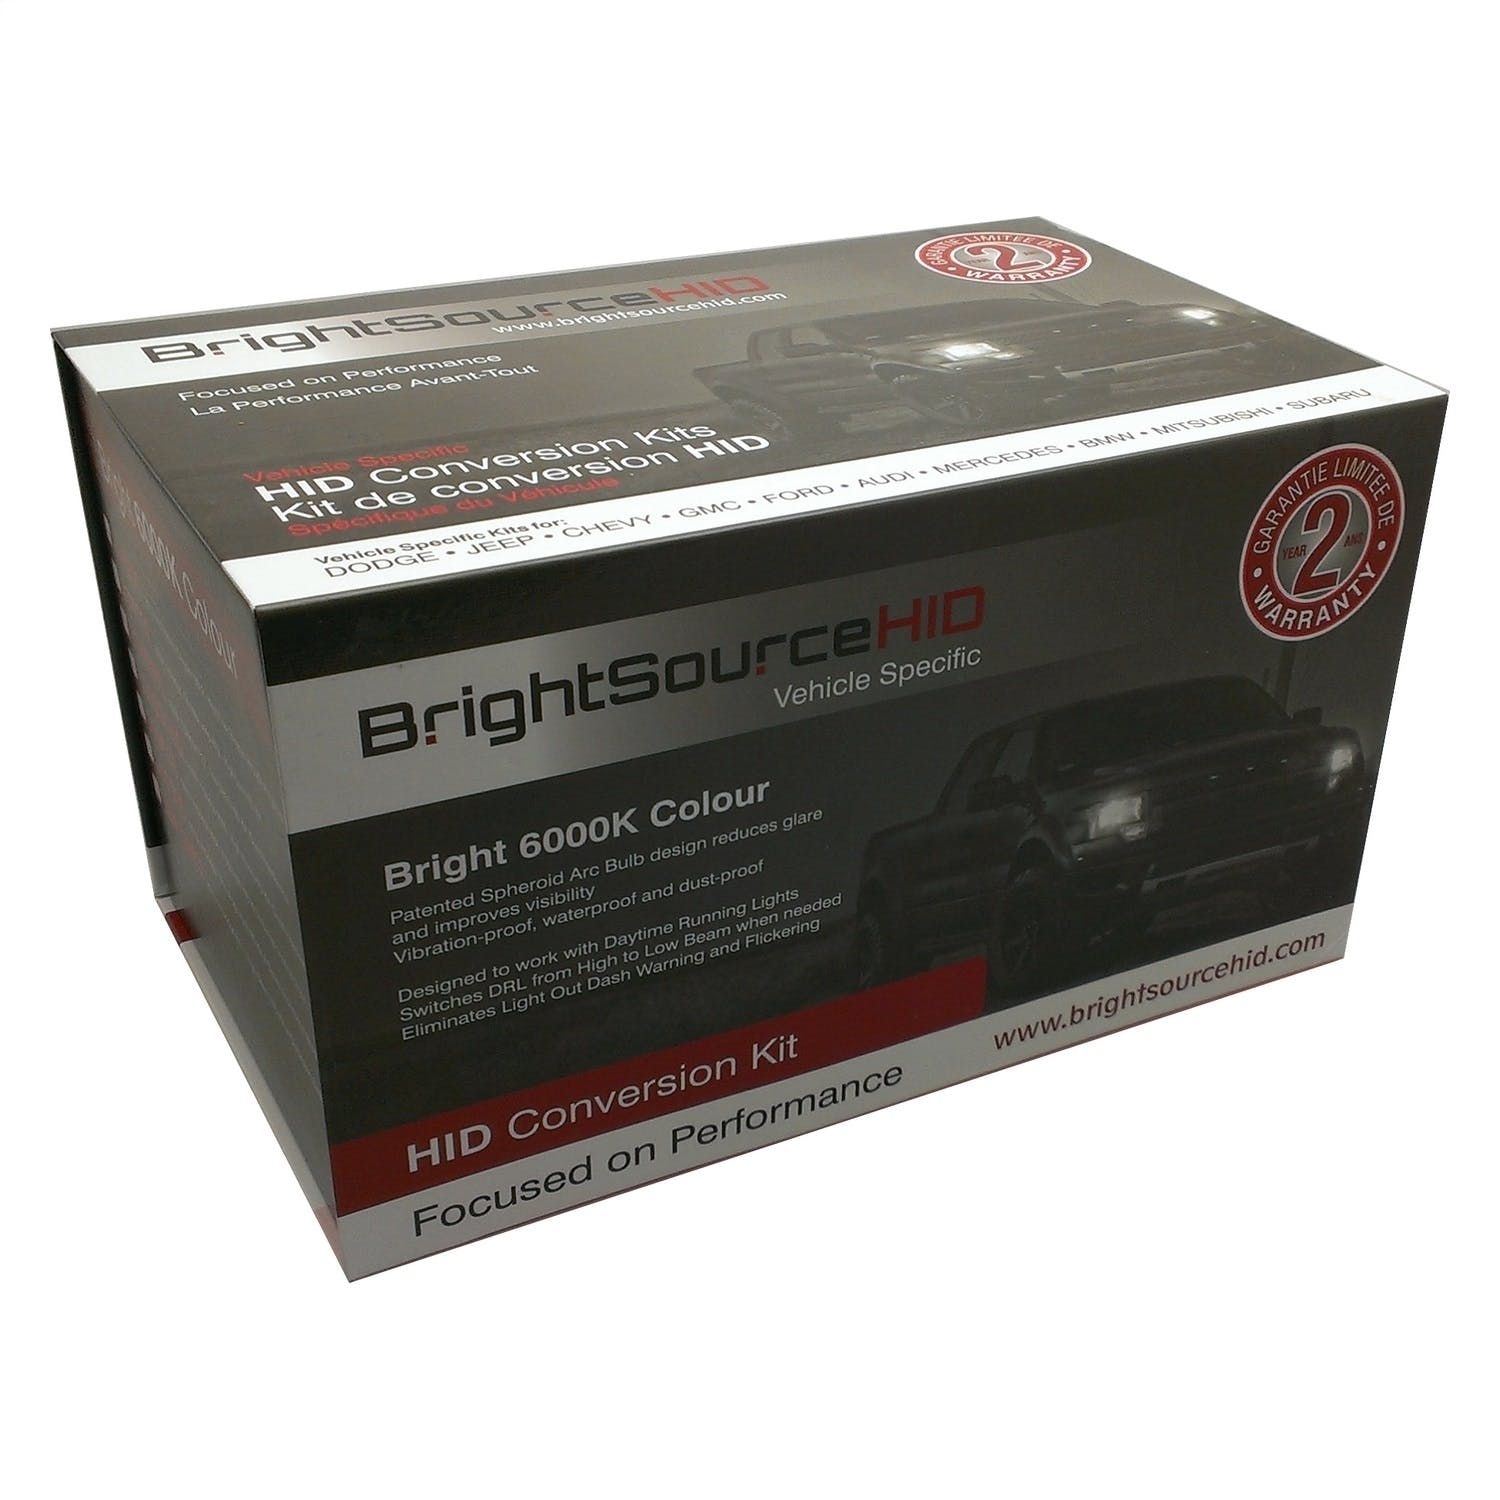 BrightSource 33616 2012-17 Ford Focus H11-Low Beam